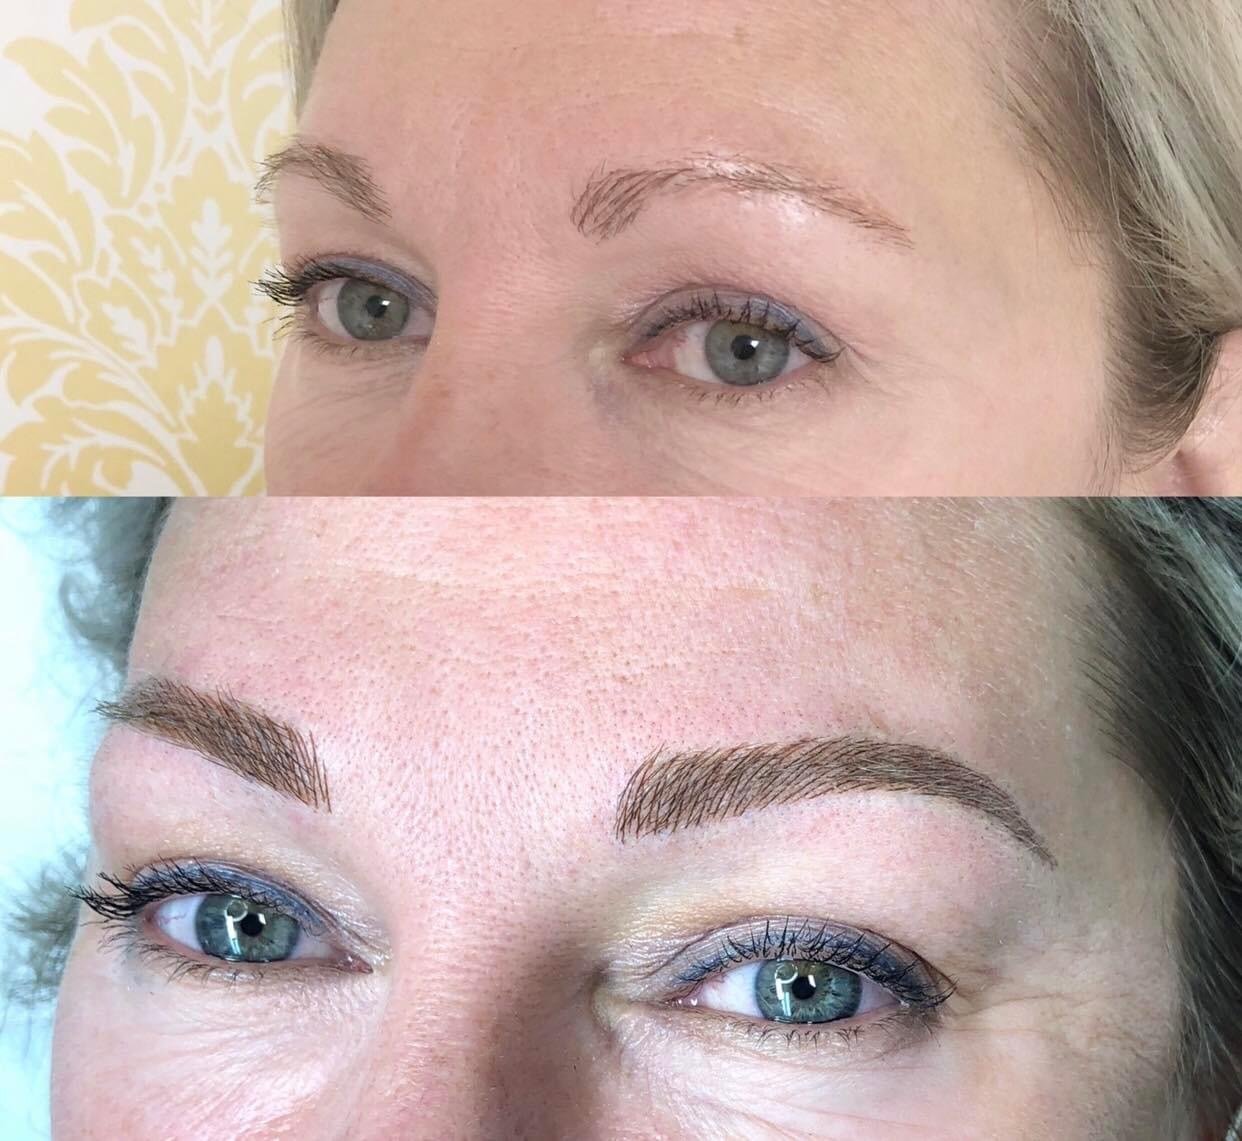 microblading bucks county, philly microblading, doylestown microblading eyebrows, new jersey brows, microblading new york, microblading training, microblading tutorial, microblading philadelphia, philly laser tattoo removal.JPG